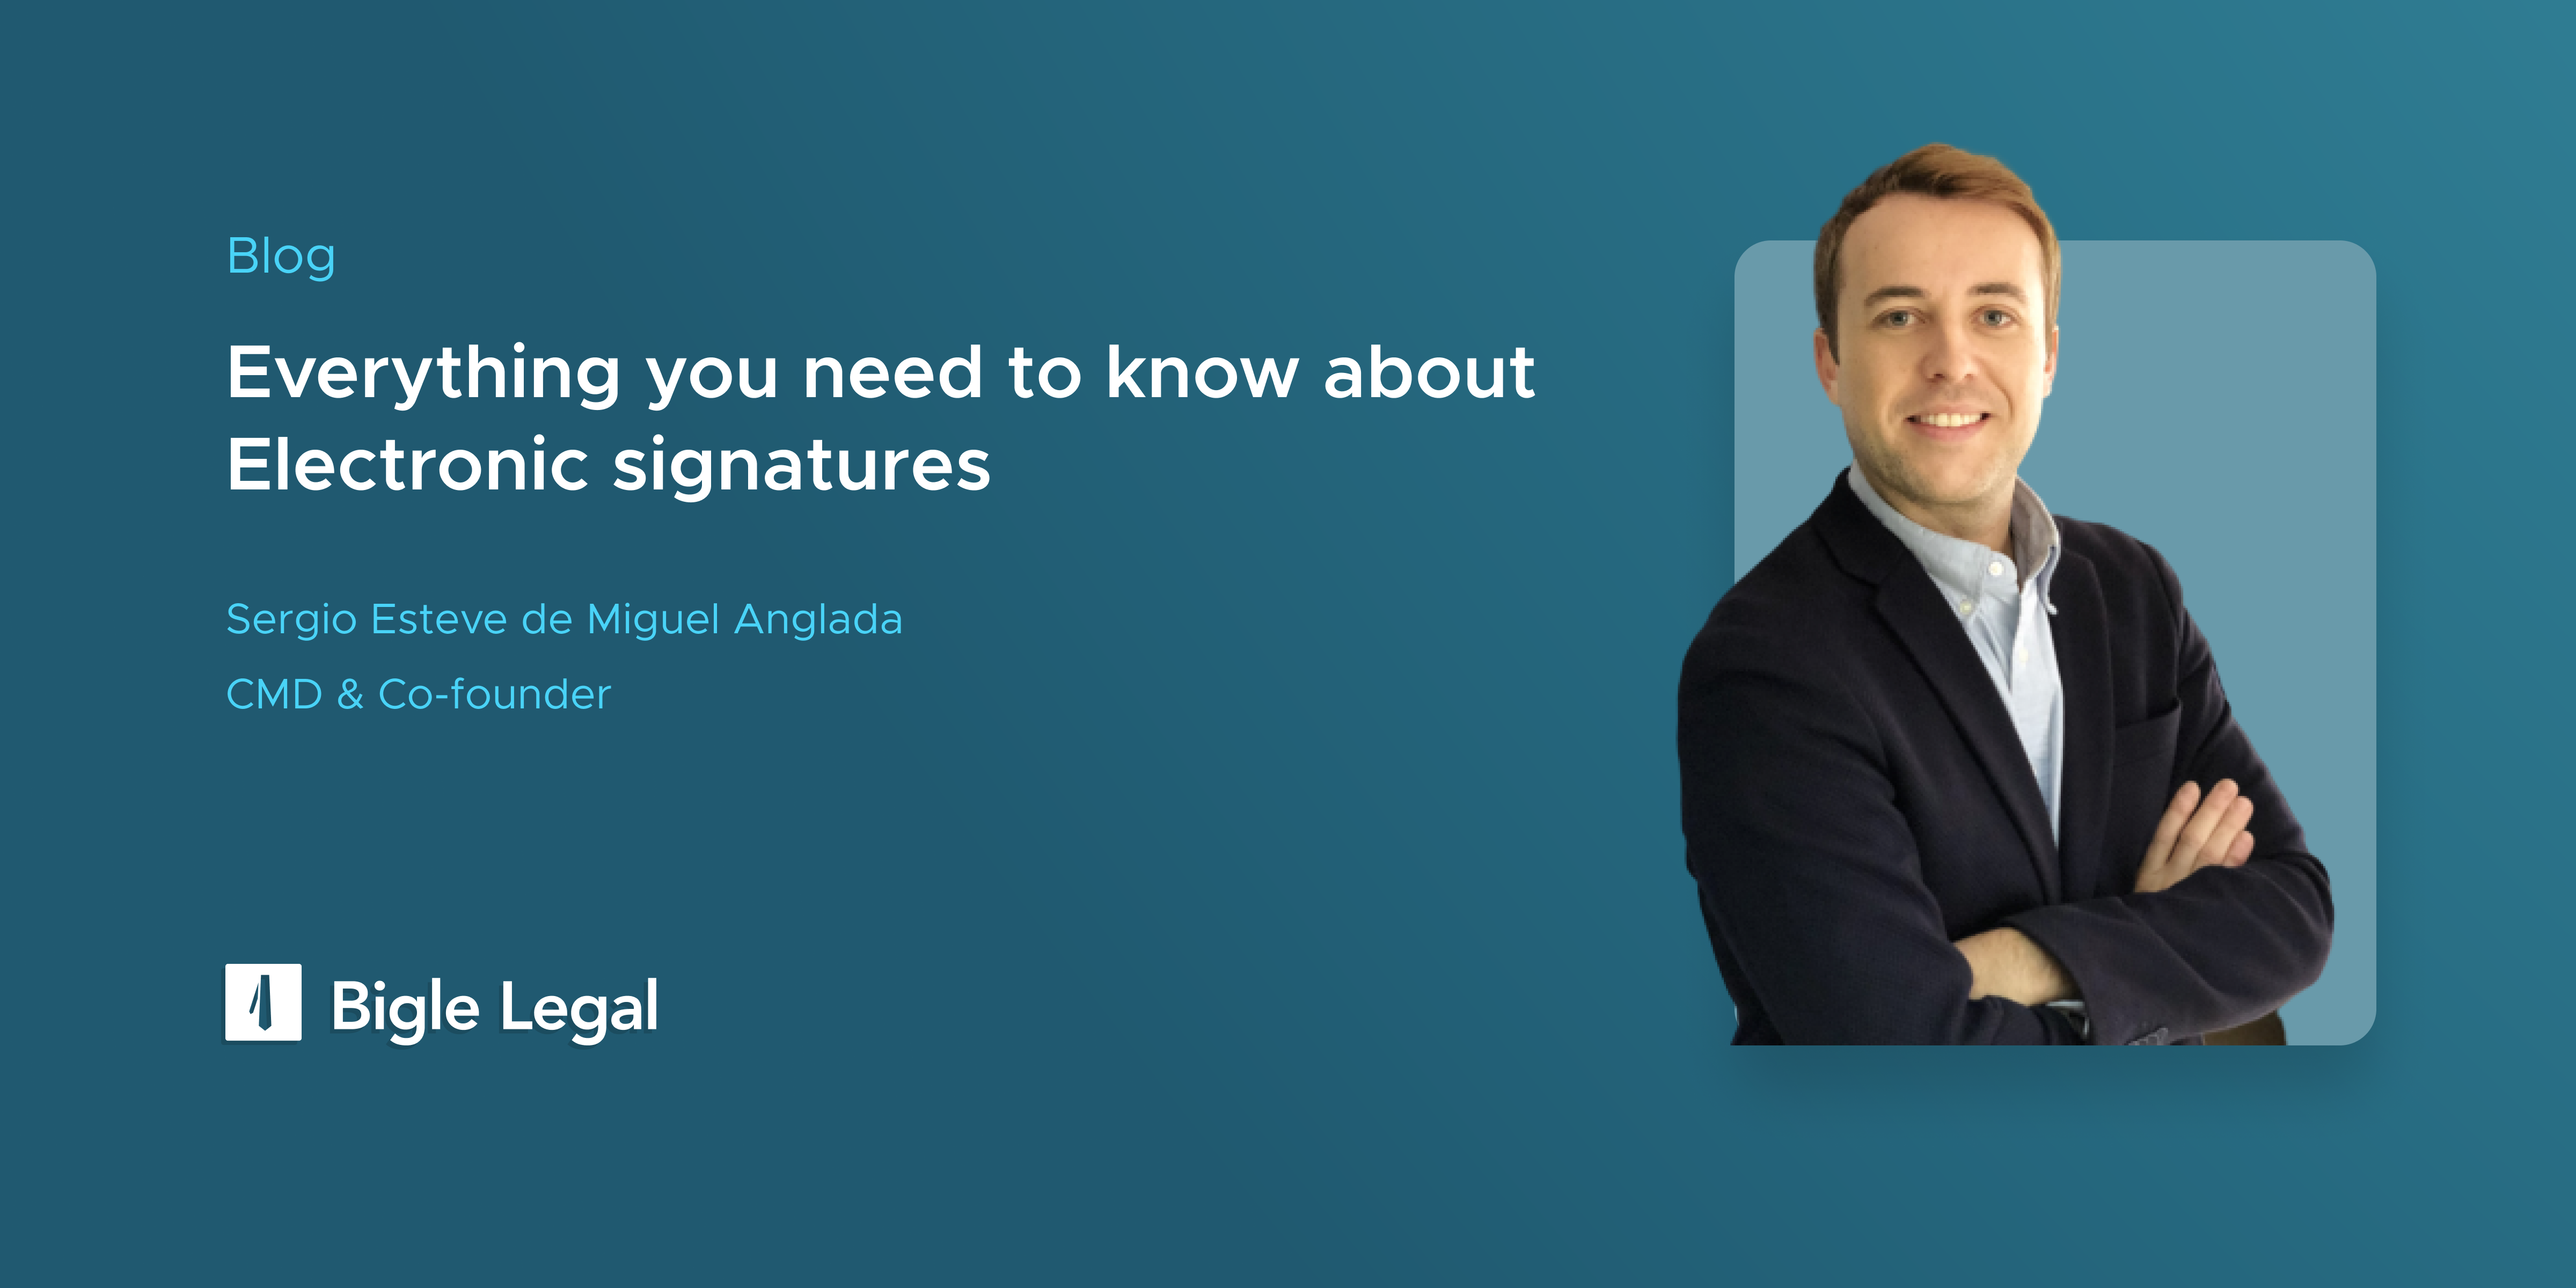 Everything you need to know about electronic signatures